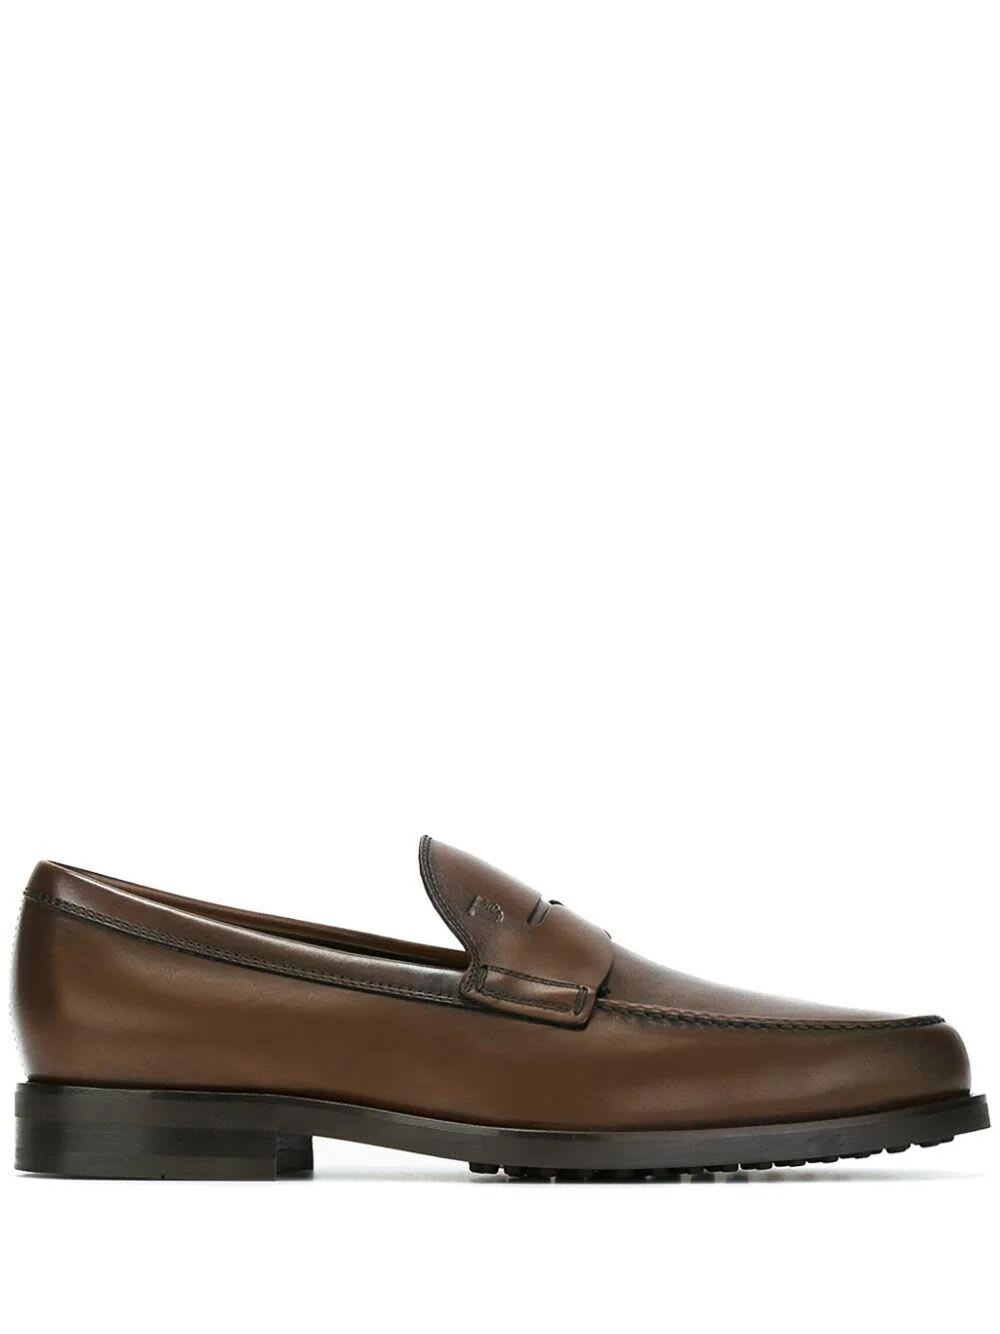 TOD'S SPECIAL LOAFER